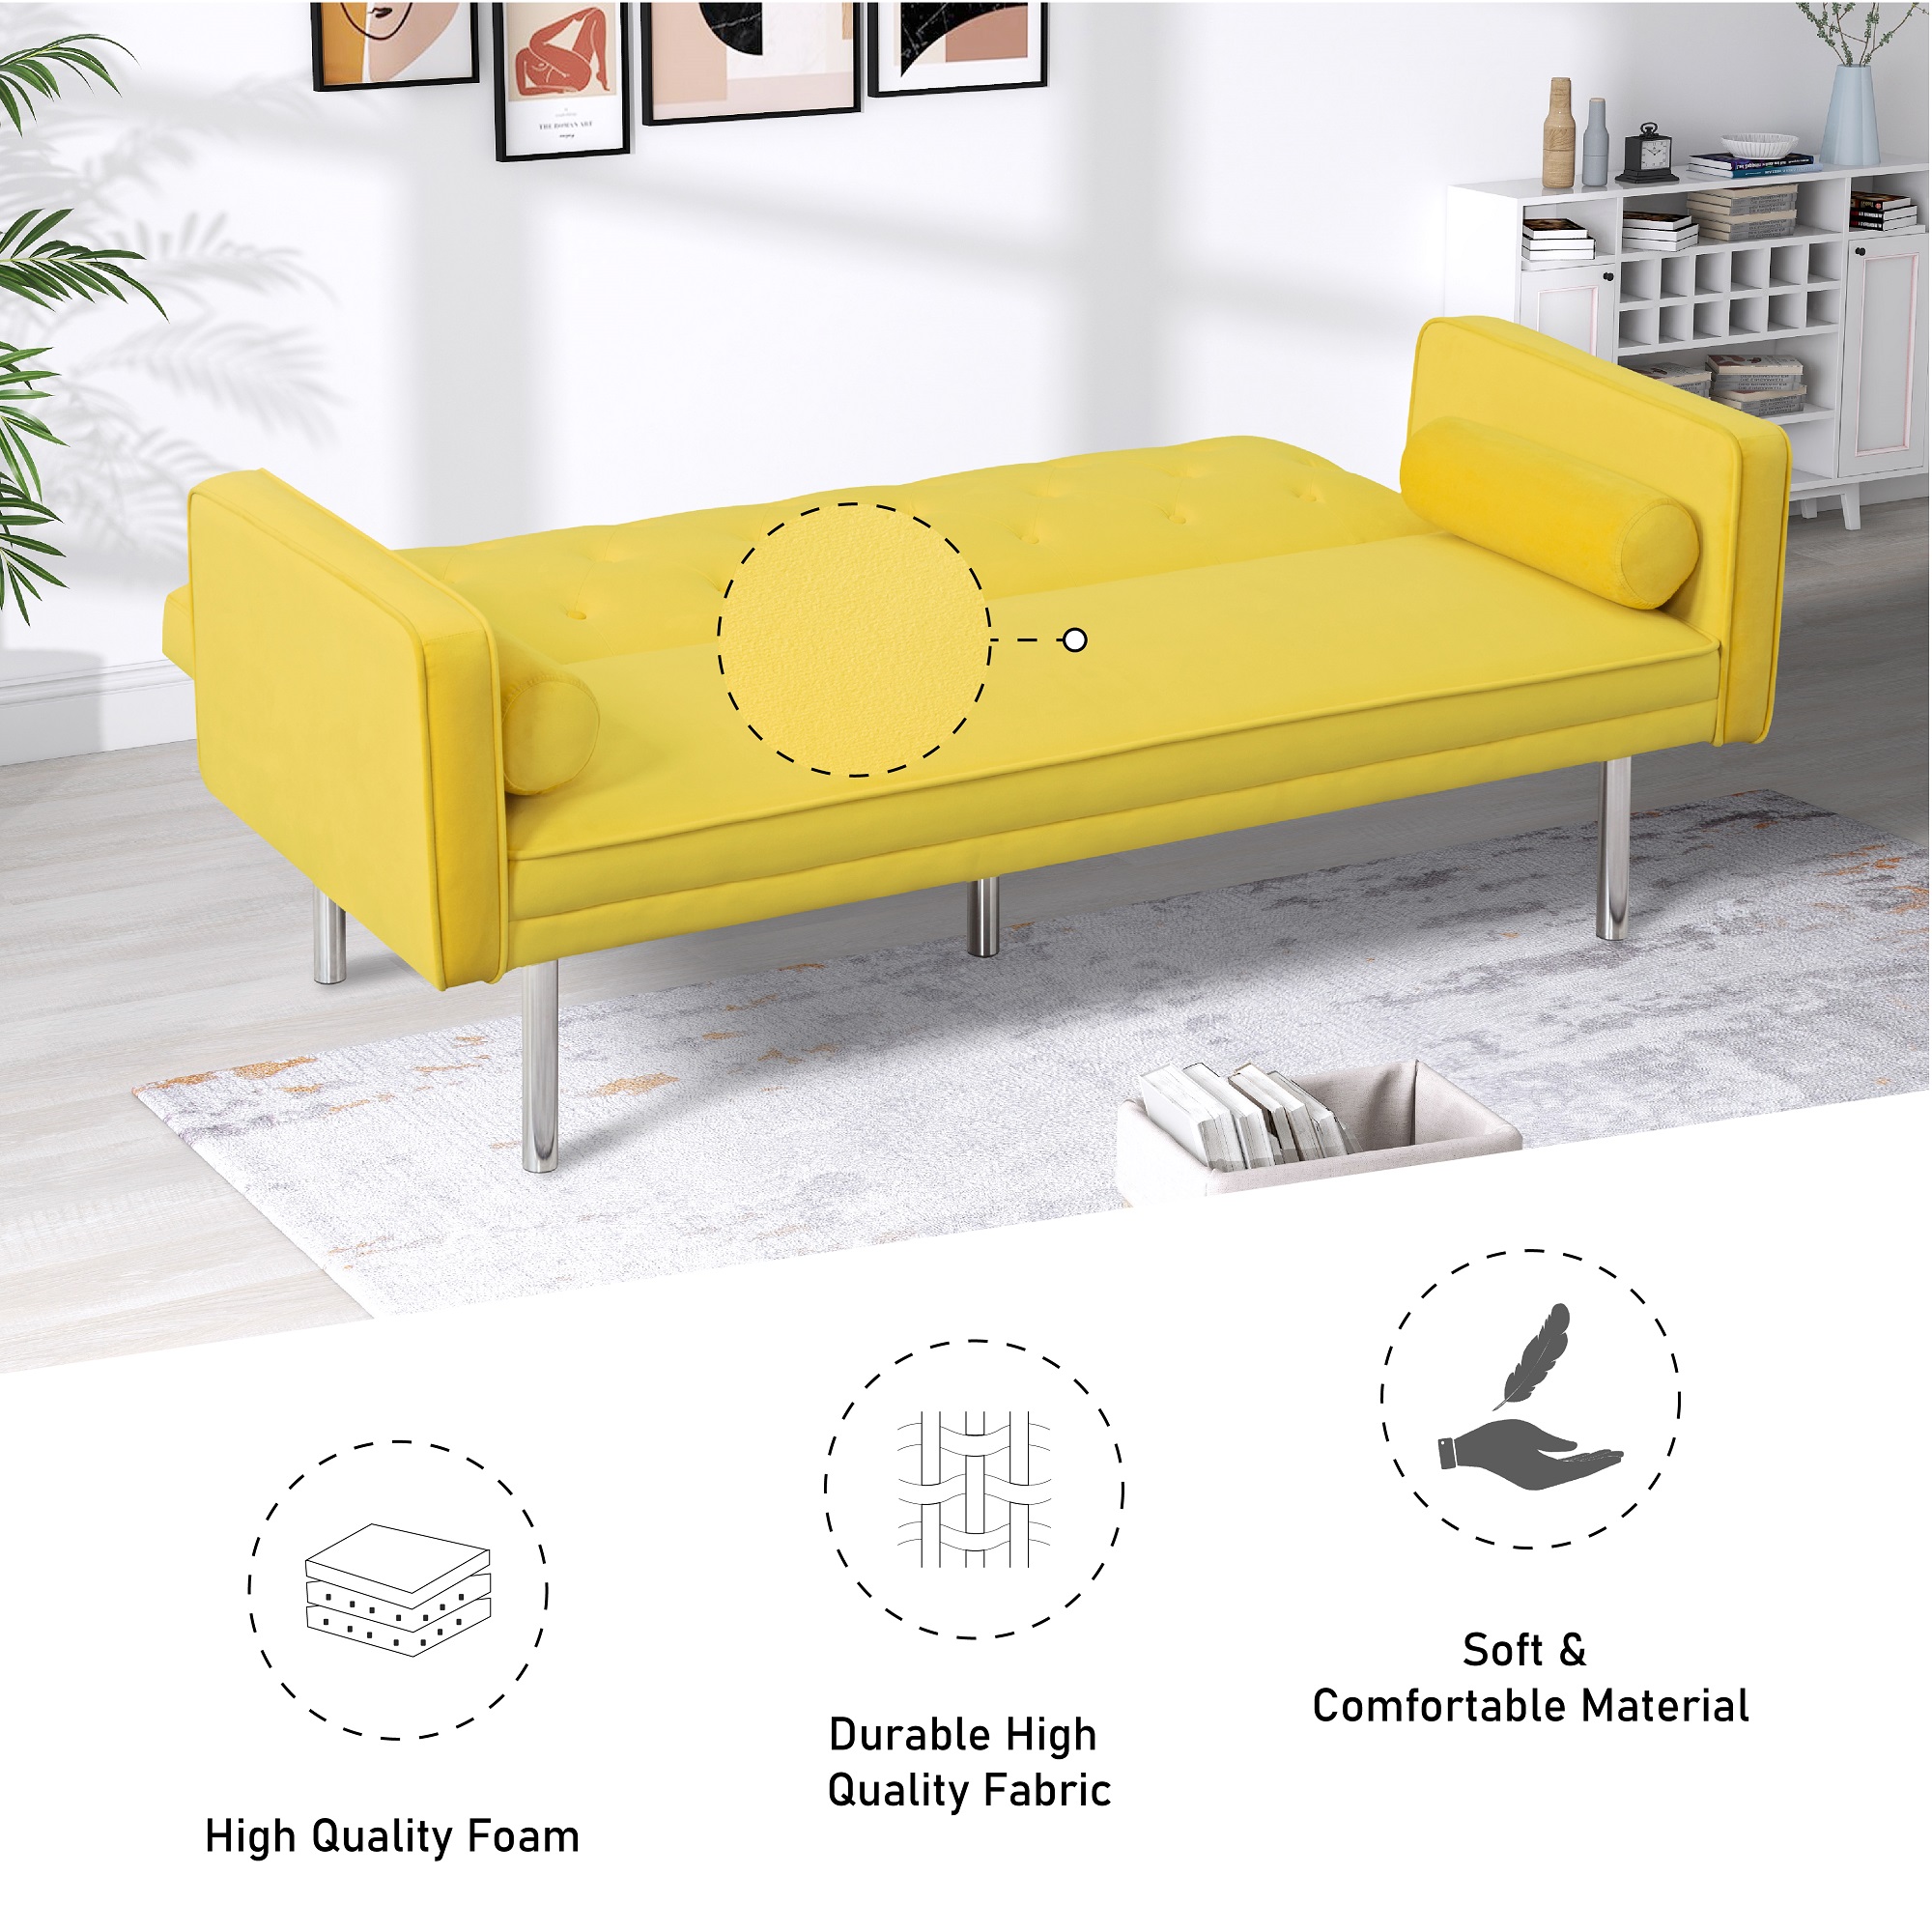 Modstyle Futon Sofa Bed, Velvet Convertible Sleeper Sofa with Pillows, Yellow - image 4 of 8